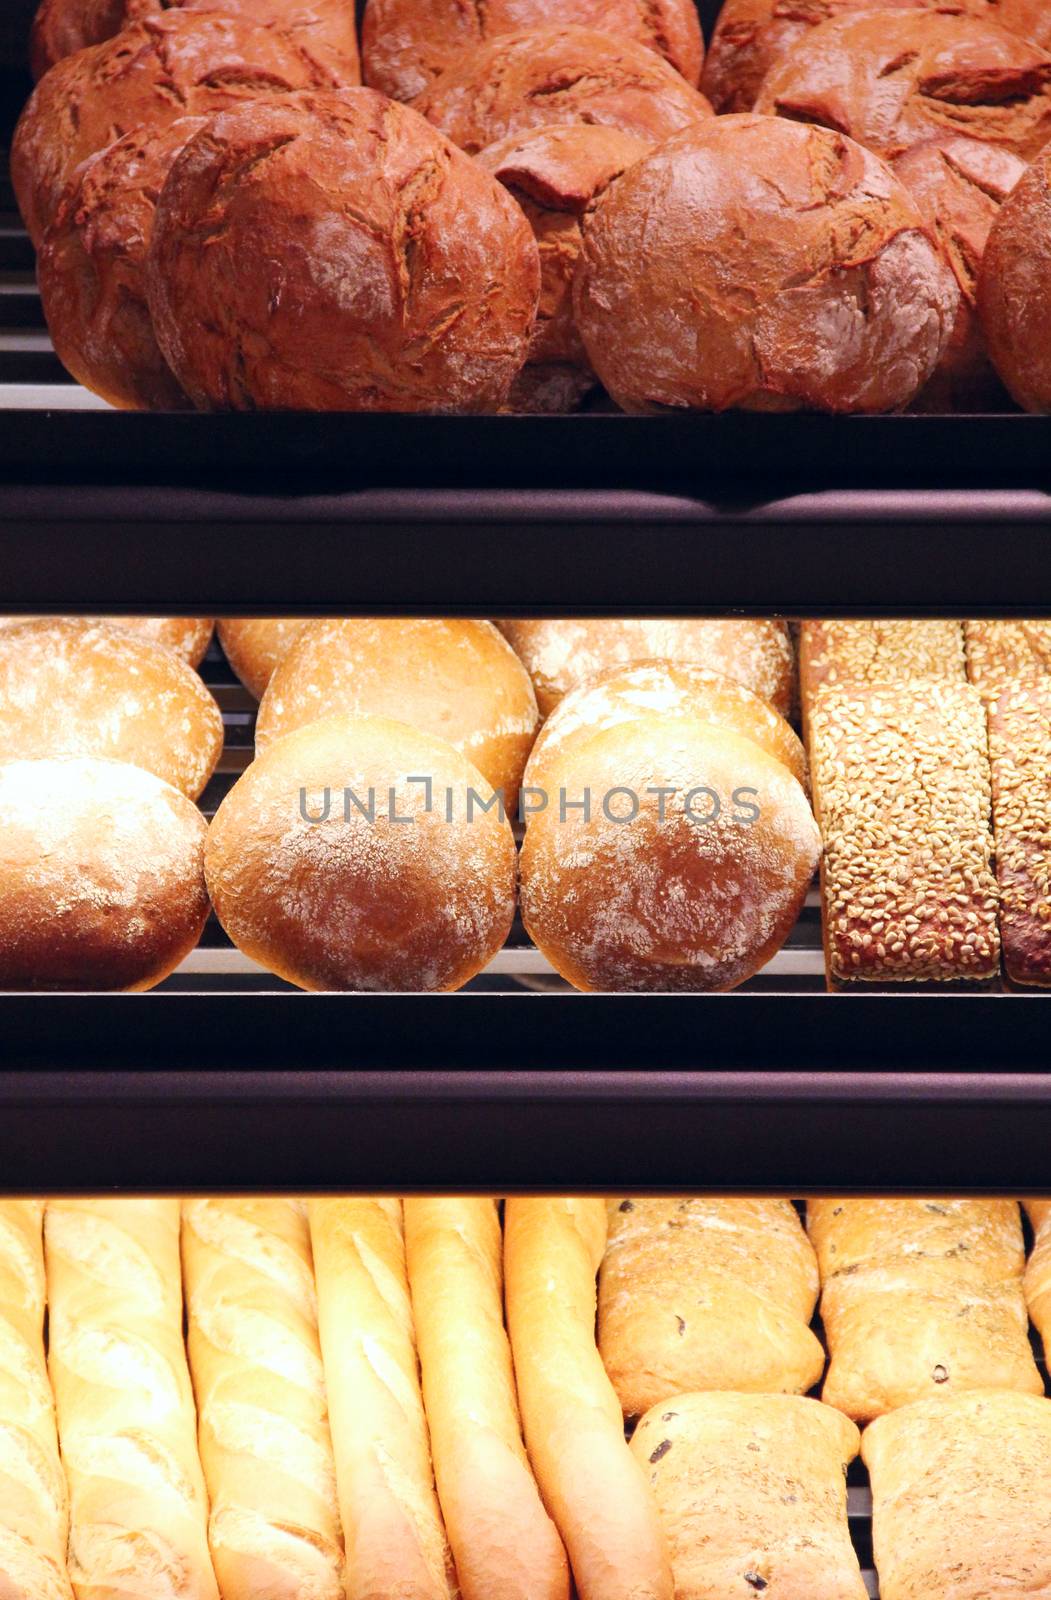 Bread on showcase in supermarket, close-up view